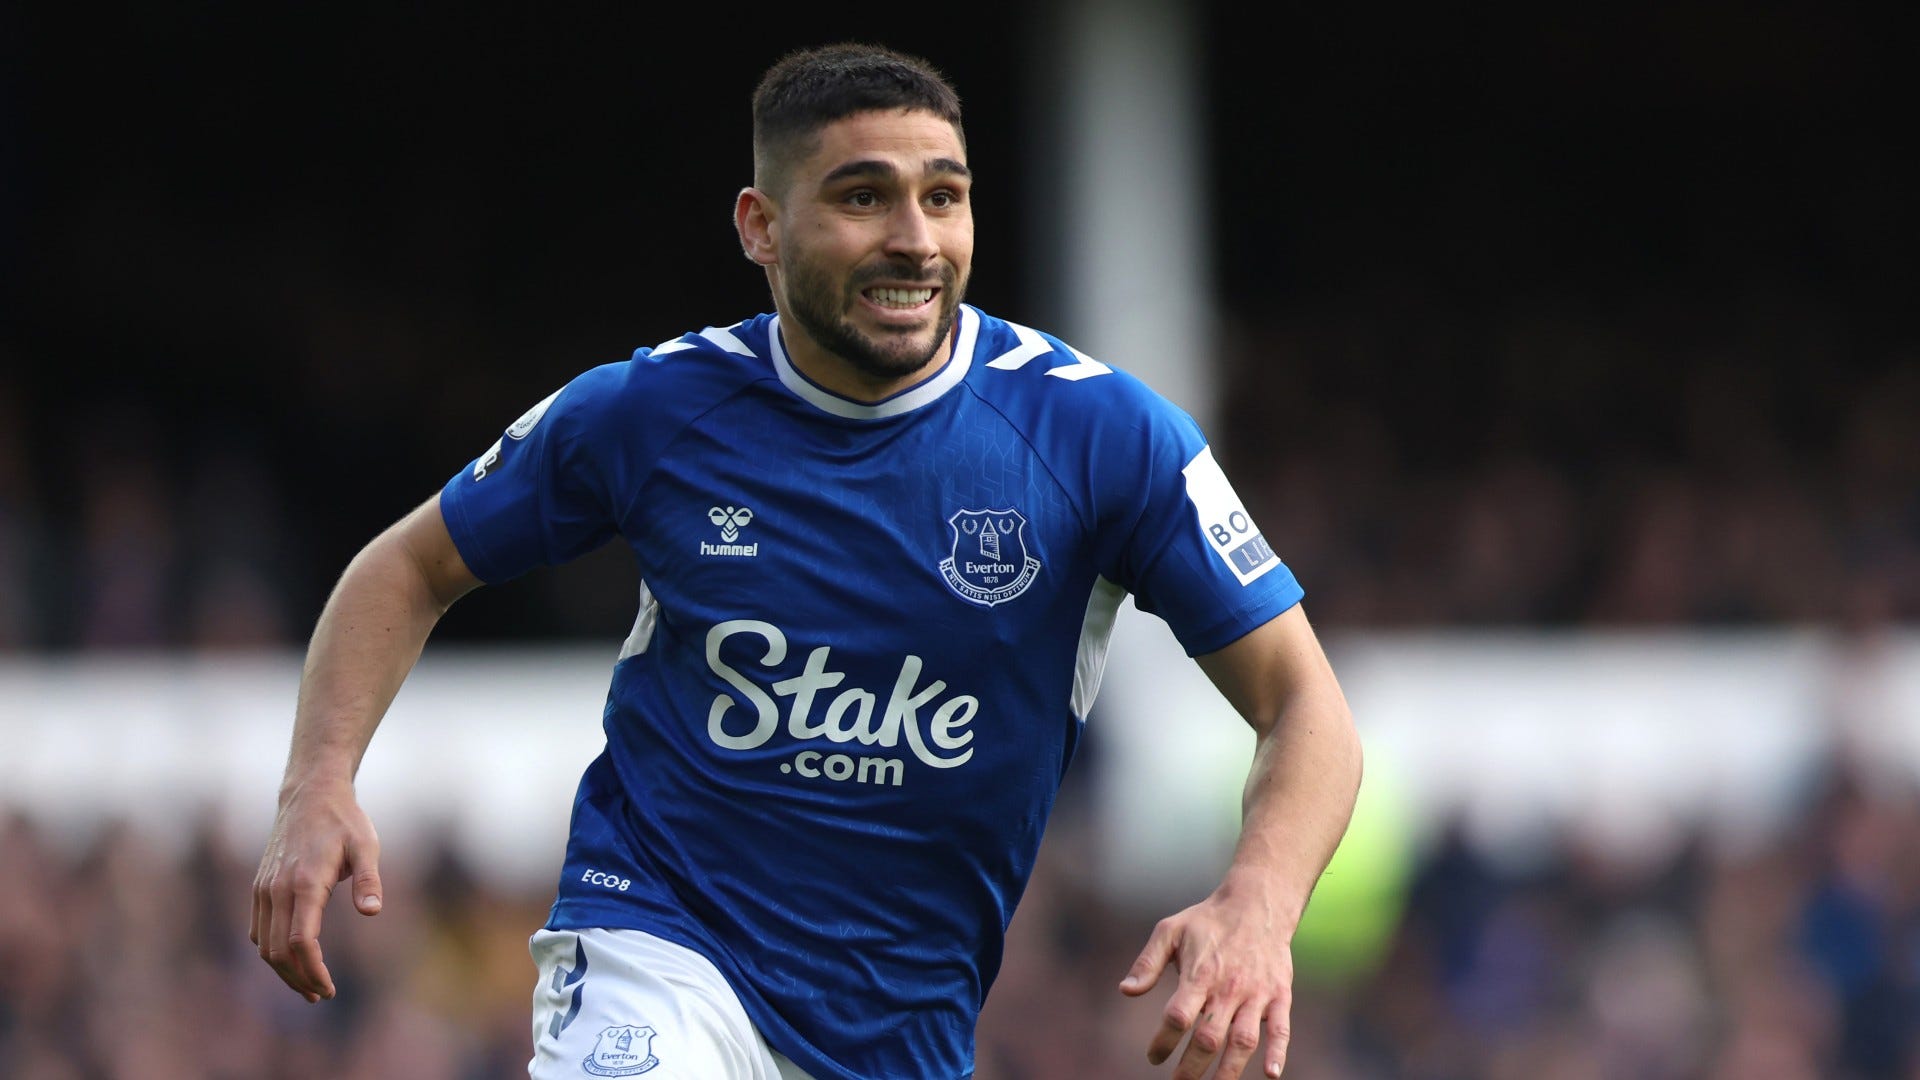 Everton vs Newcastle United Where to watch the match online, live stream, TV channels and kick-off time Goal